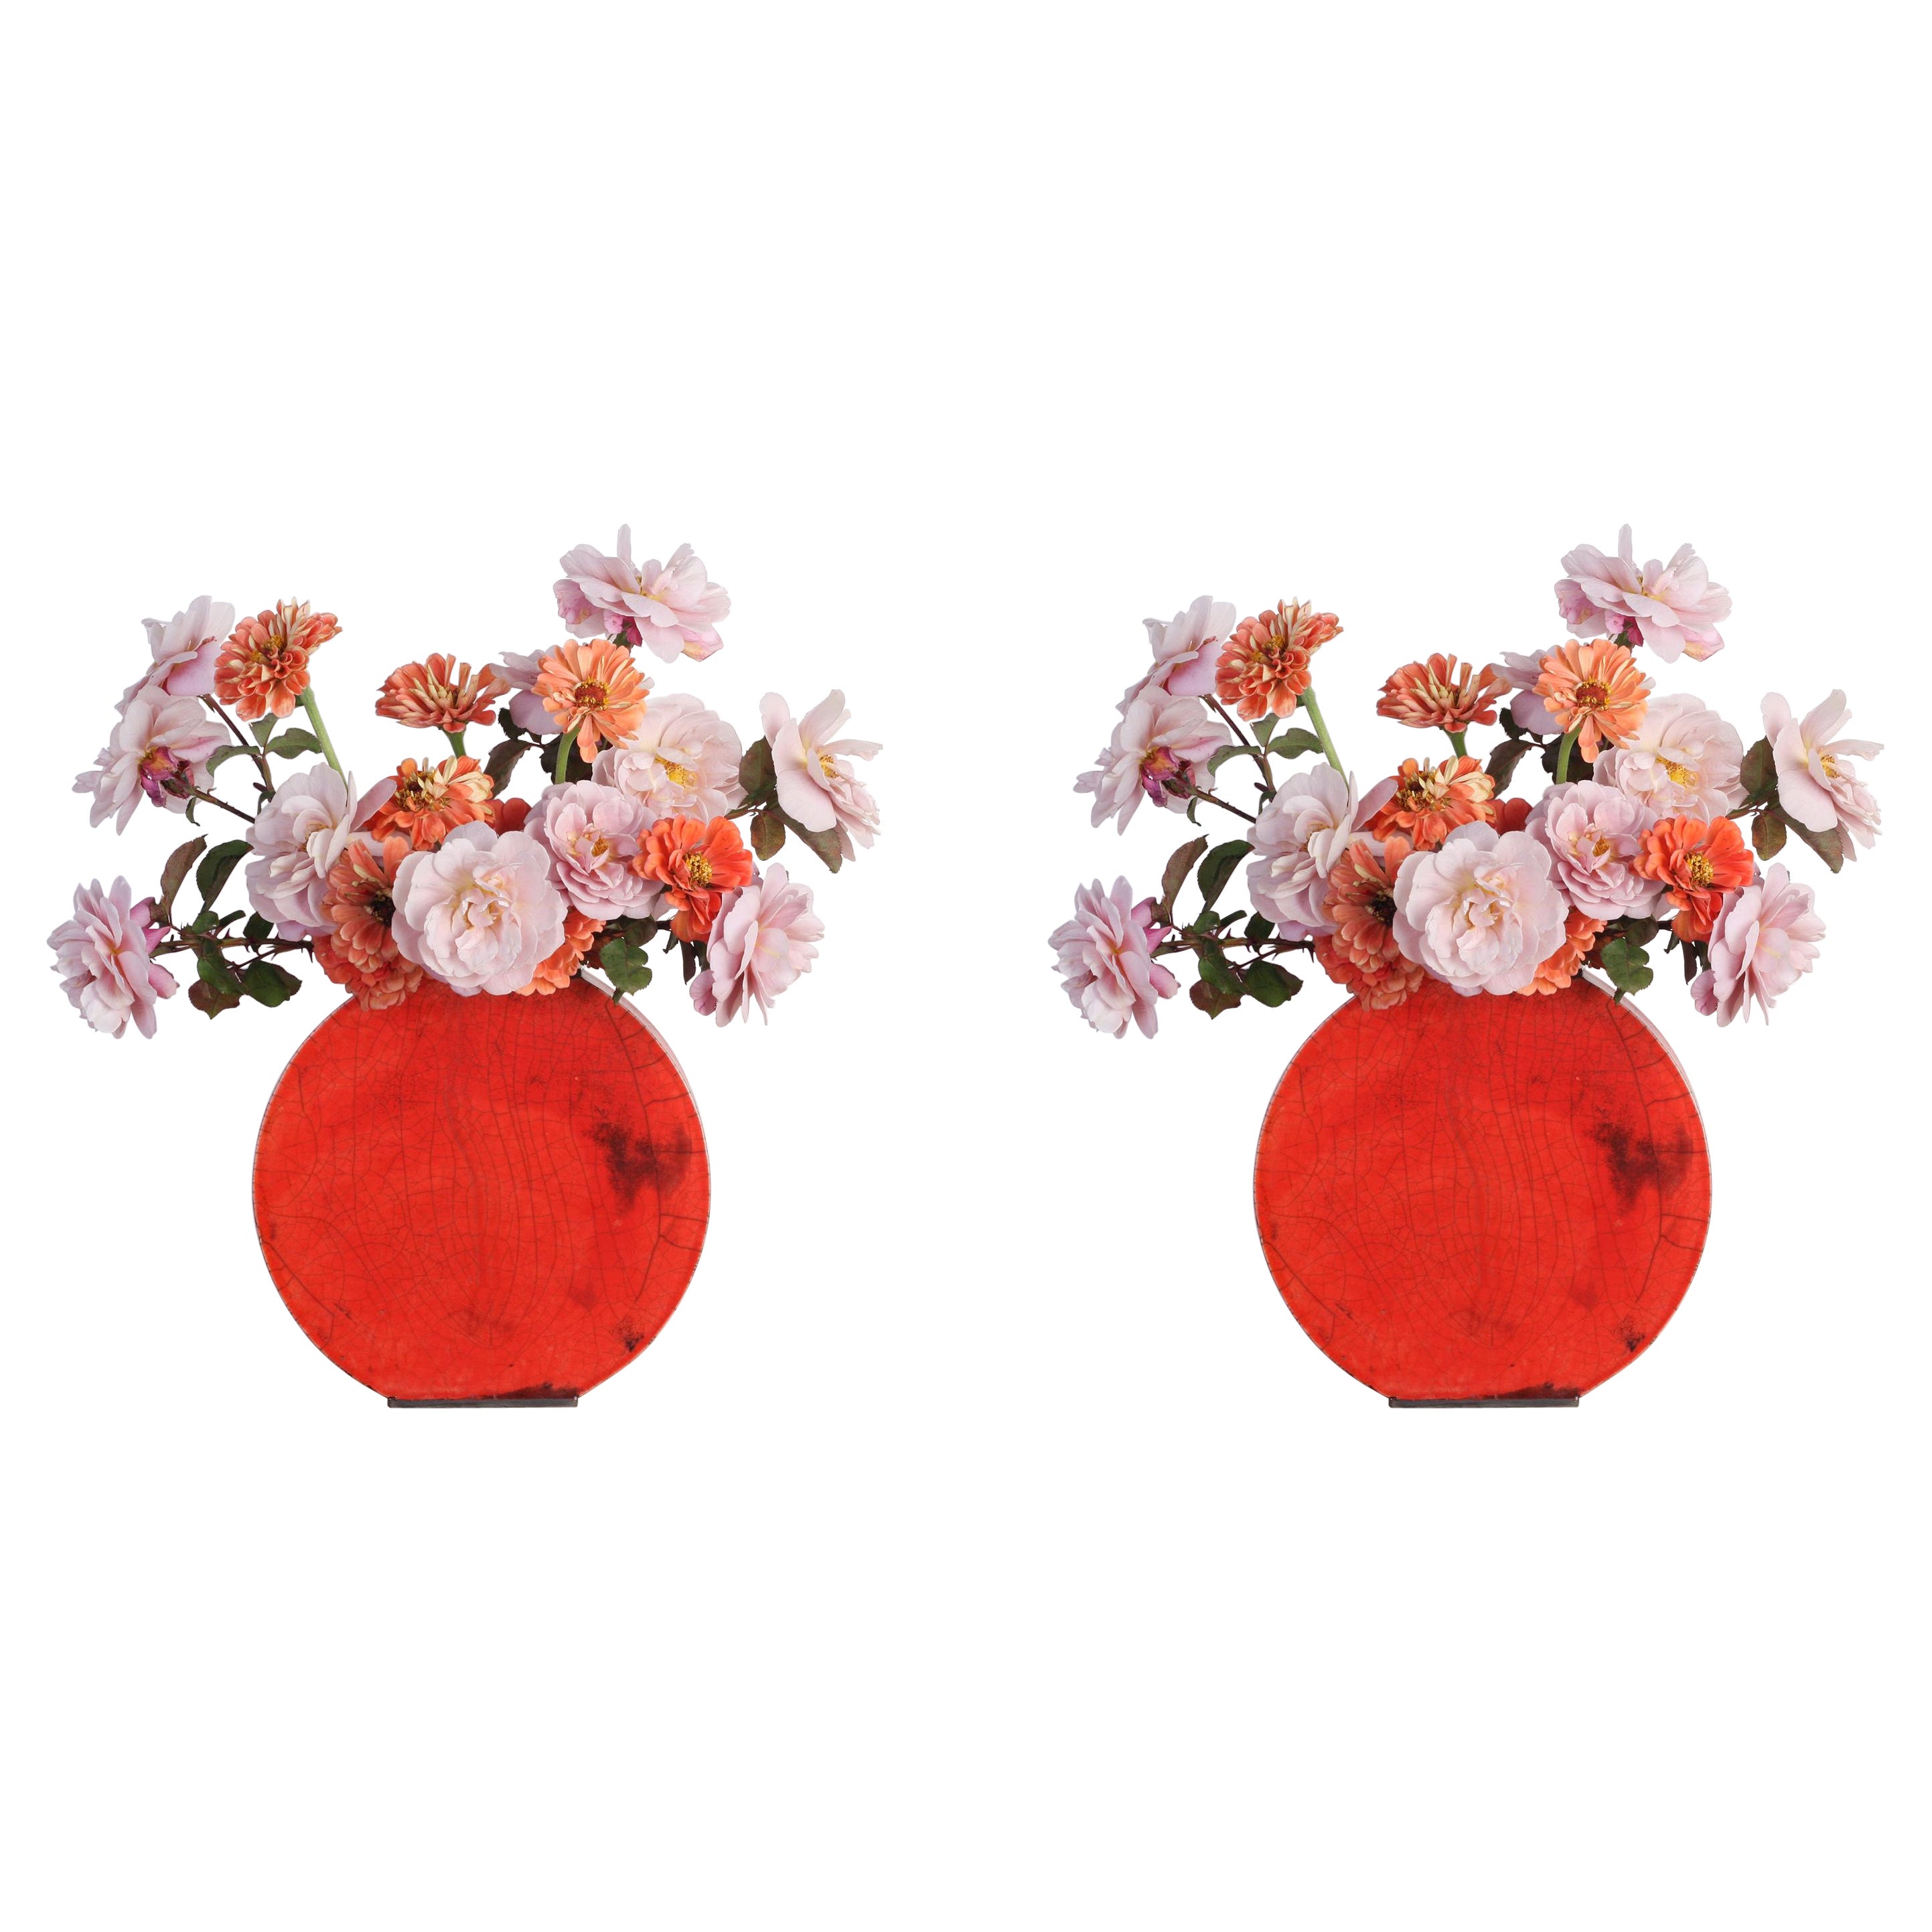 Set of 2 Small Red Orange Vases by Doa Ceramics For Sale